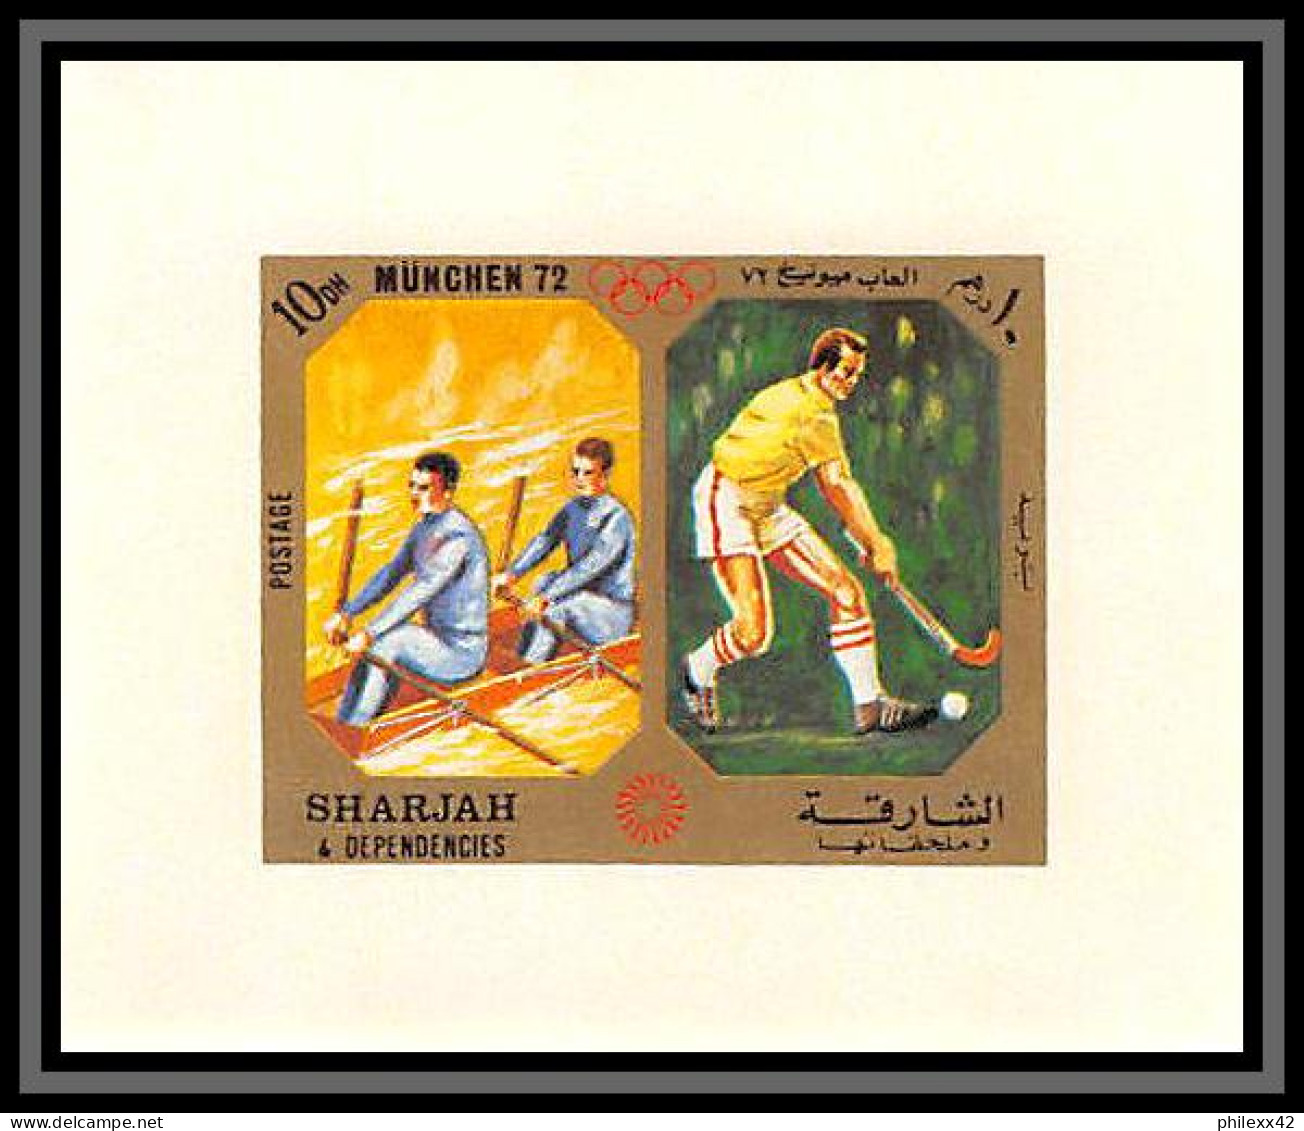 Sharjah - 2191/ N°943 Rowing Hockey Aviron Munich 1972 Jeux Olympiques Olympic Games Miniature Deluxe Sheet Neuf ** MNH - Sharjah